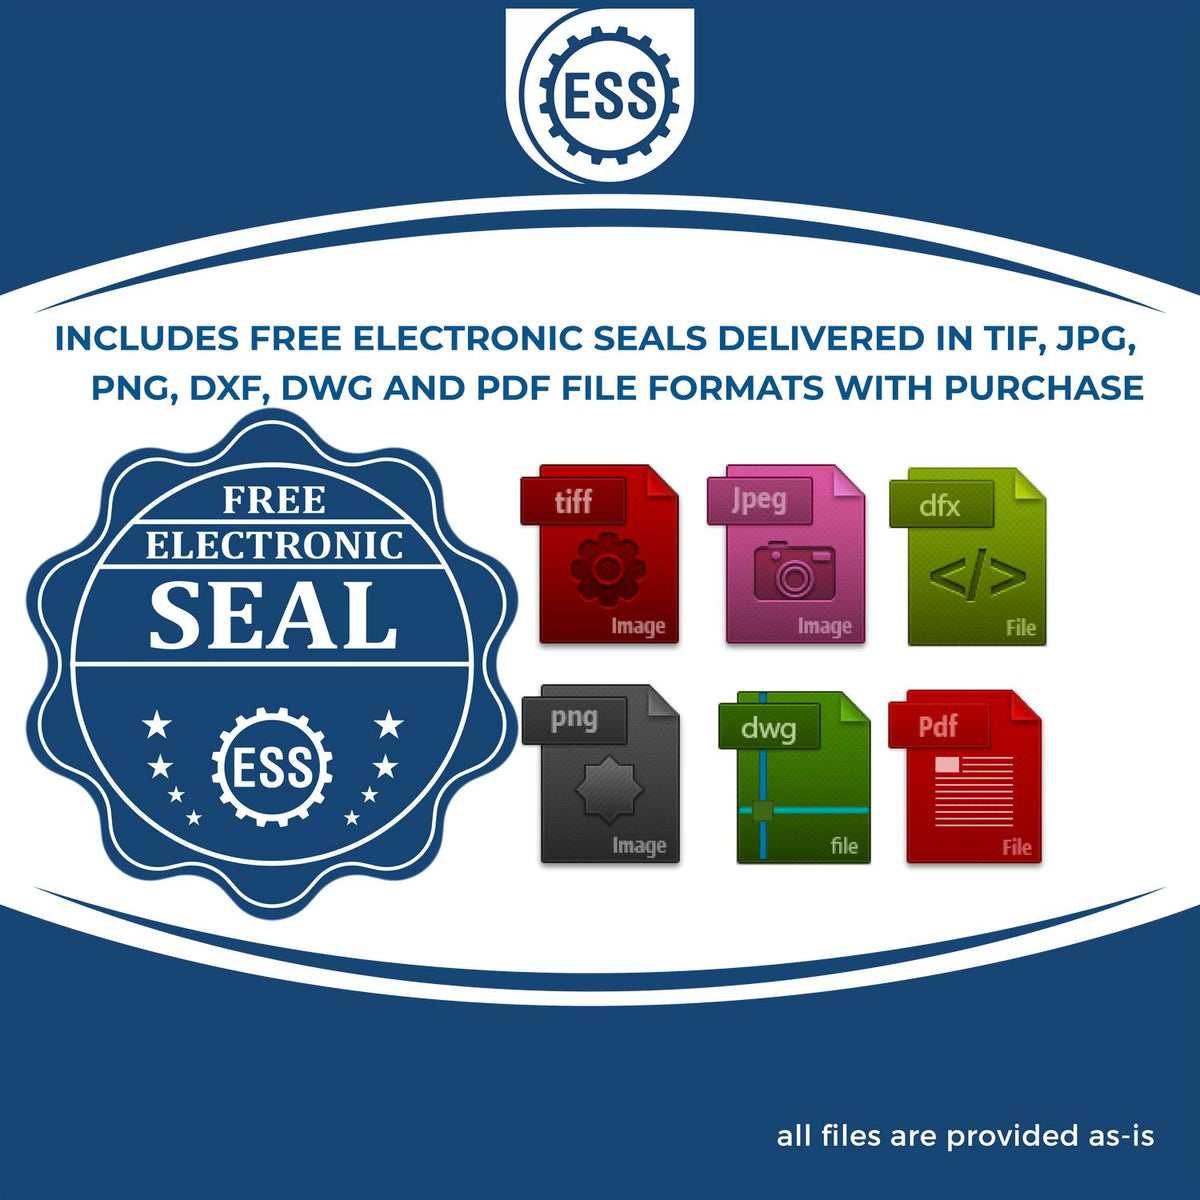 An infographic for the free electronic seal for the Gift Rhode Island Landscape Architect Seal illustrating the different file type icons such as DXF, DWG, TIF, JPG and PNG.